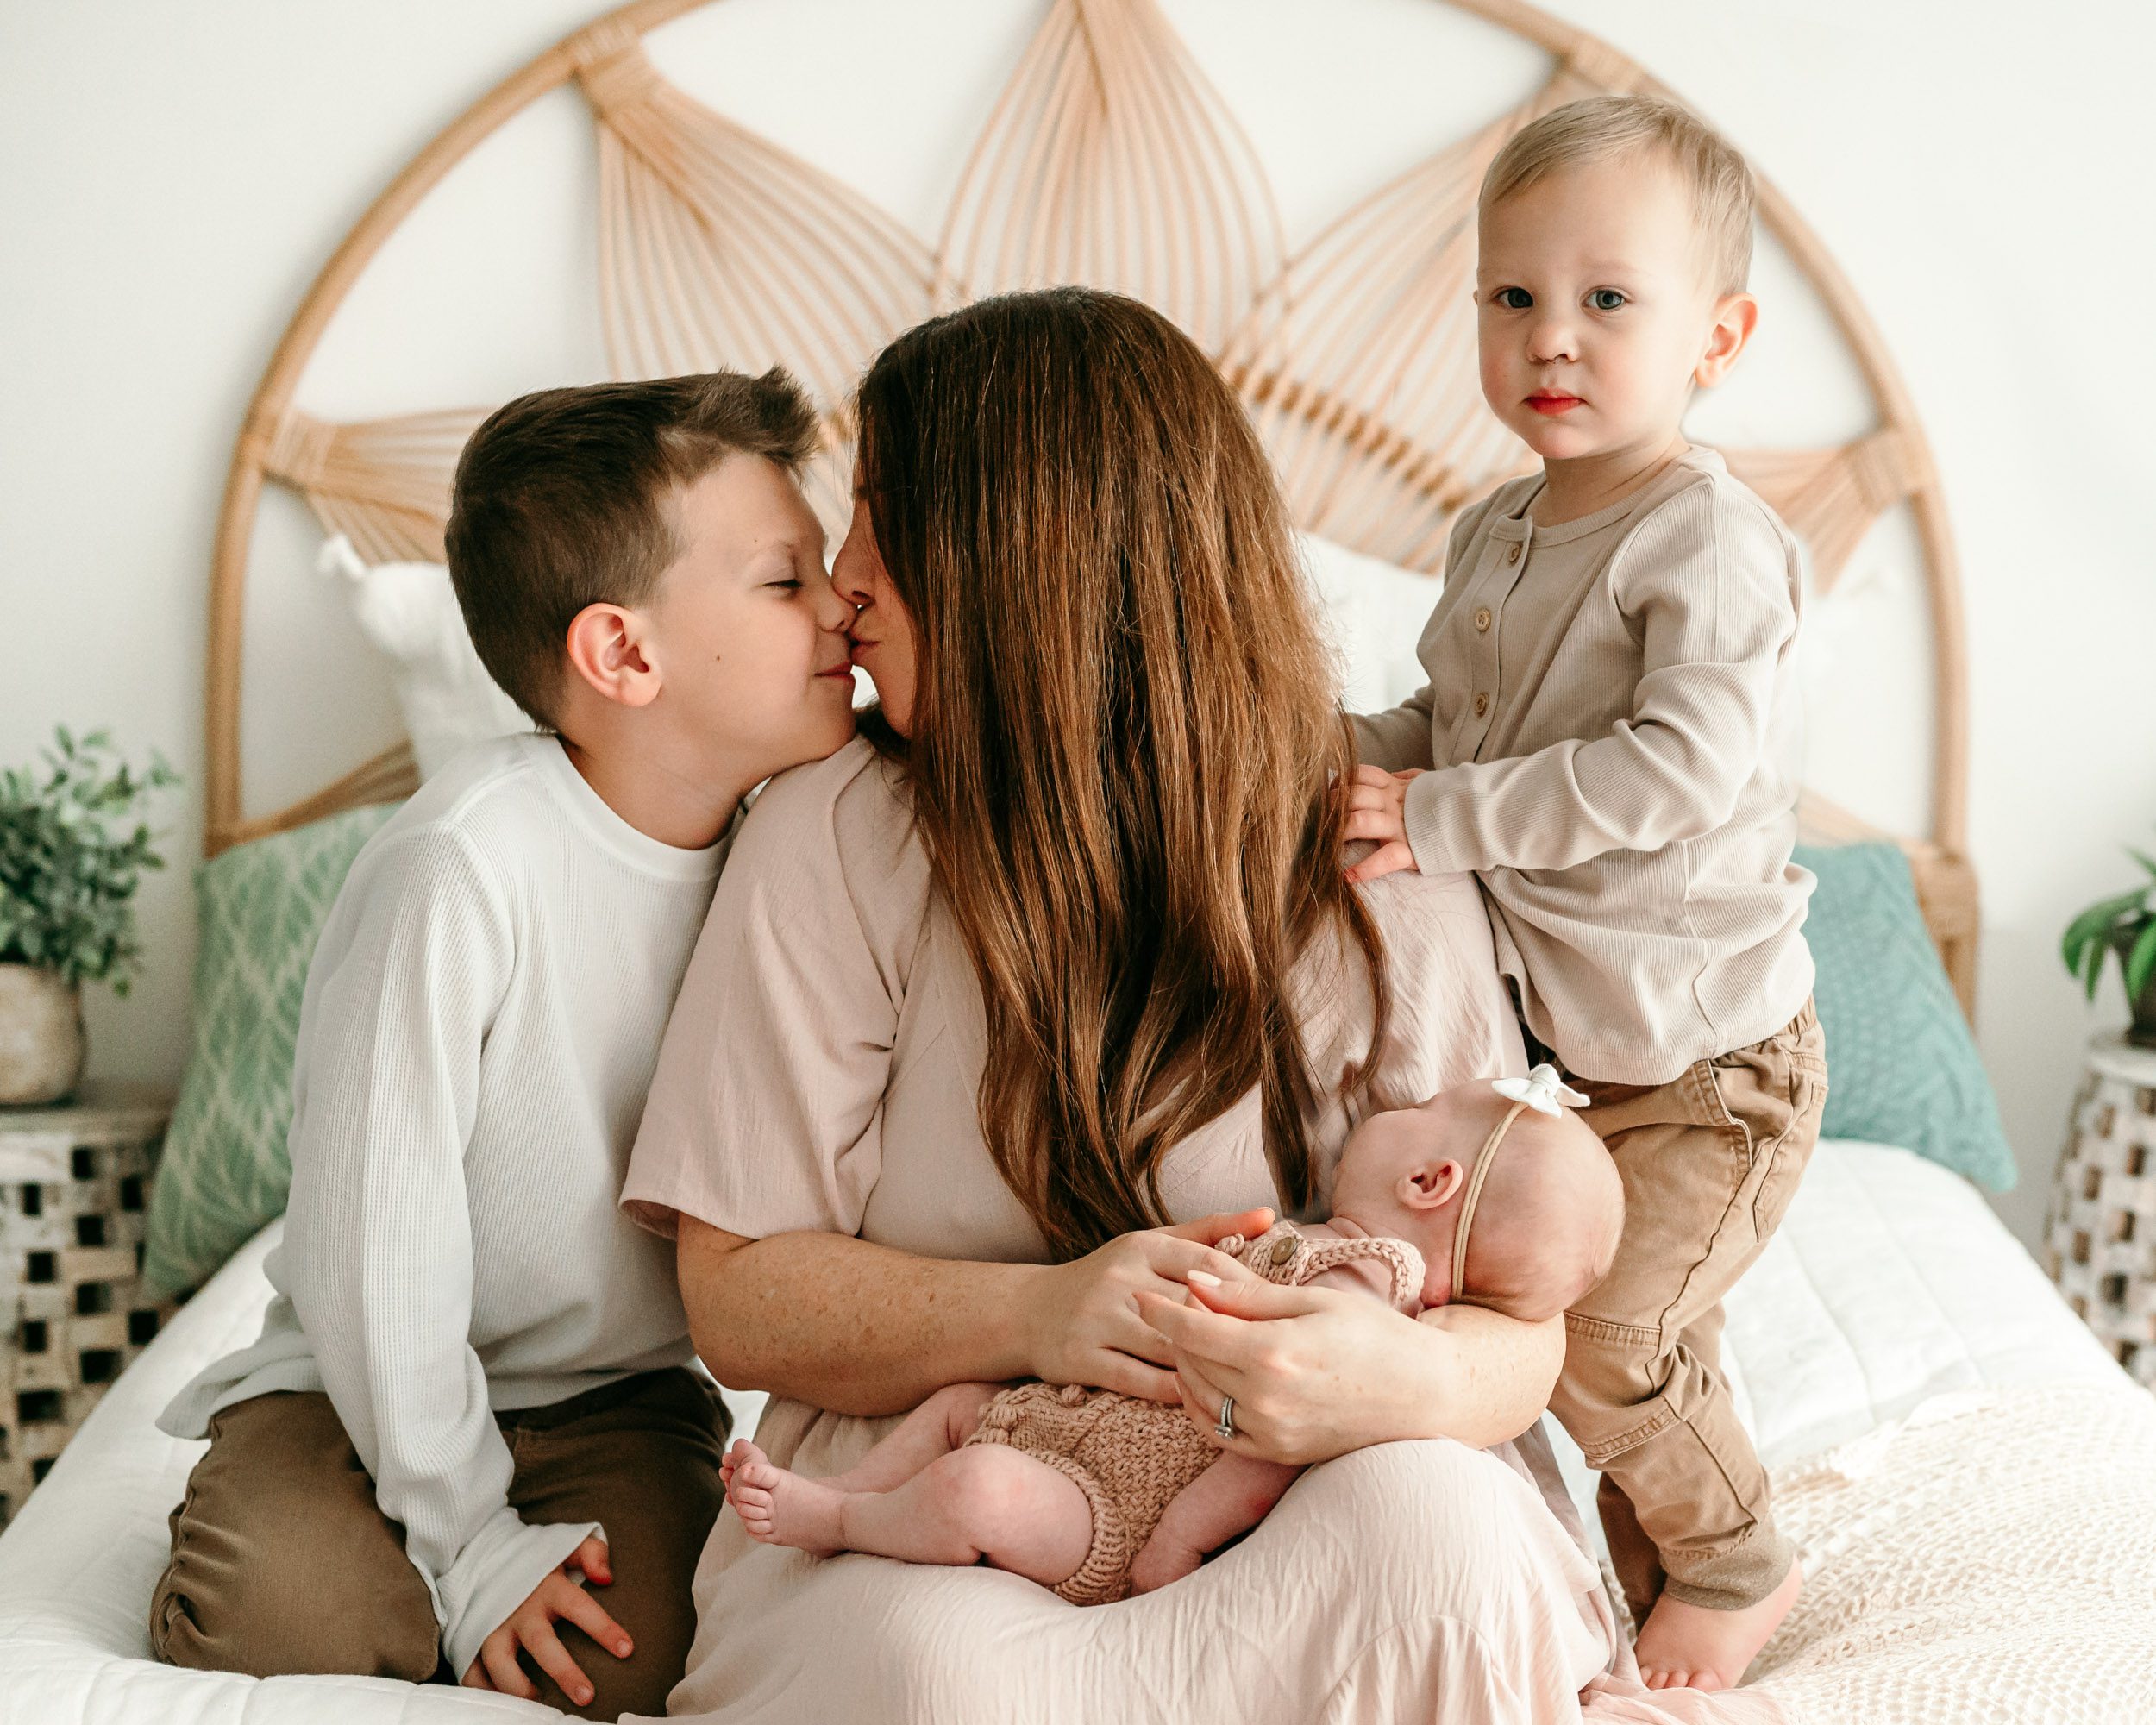 a mom sitting on a bed holding her baby girl and kissing her oldest son while her younger son hugs her shoulder and gazes at the camera during a newborn photoshoot